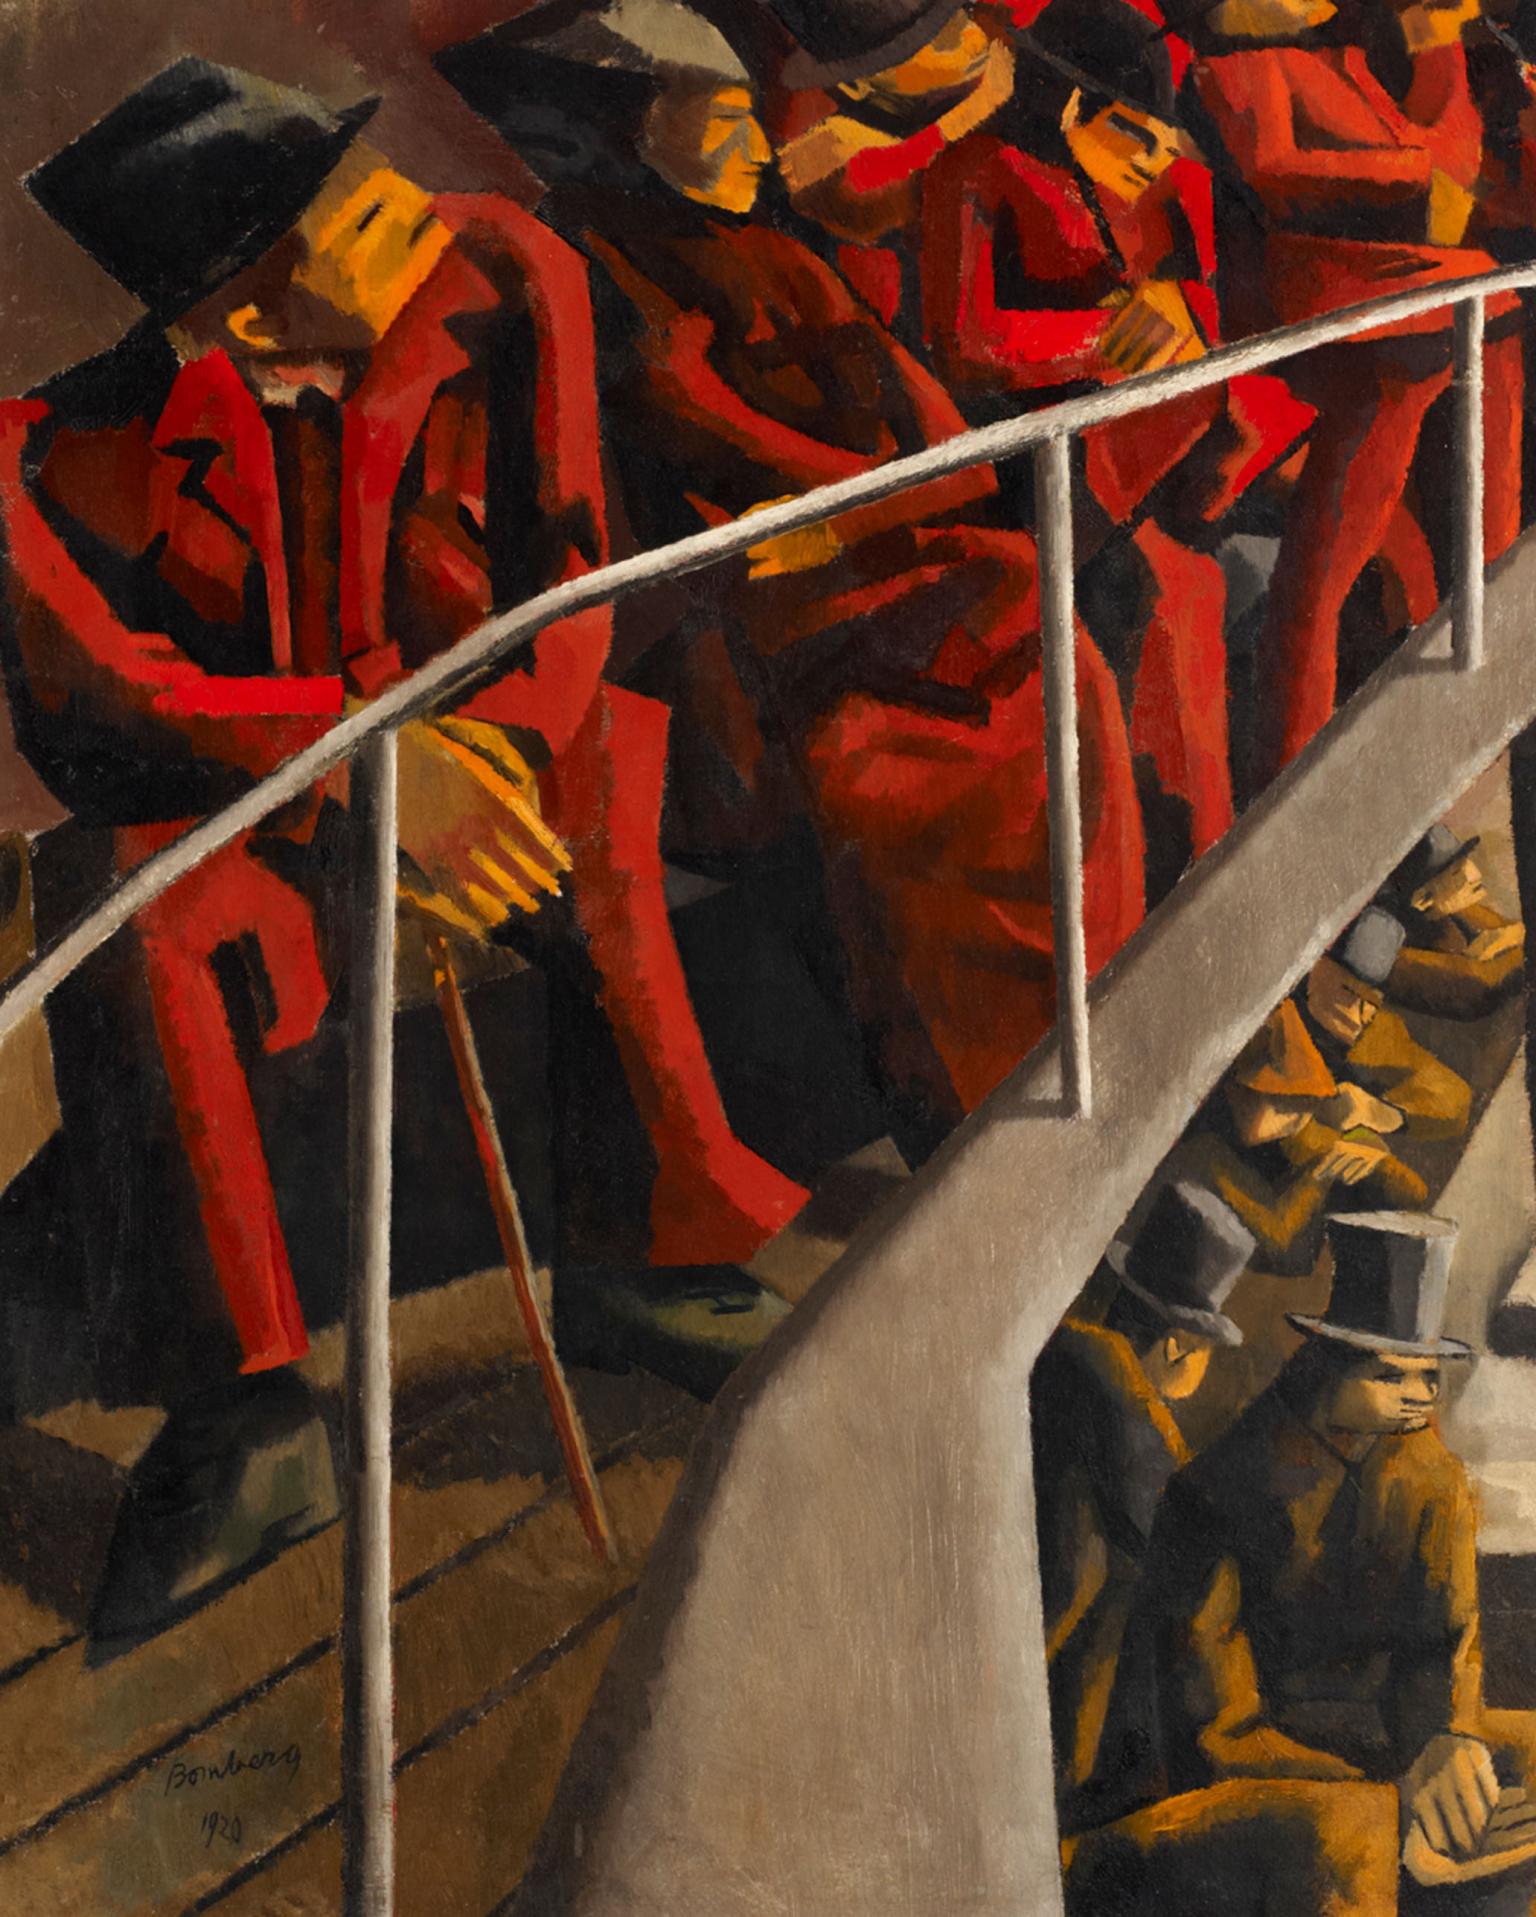 Painting of theater audience seated in balcony.